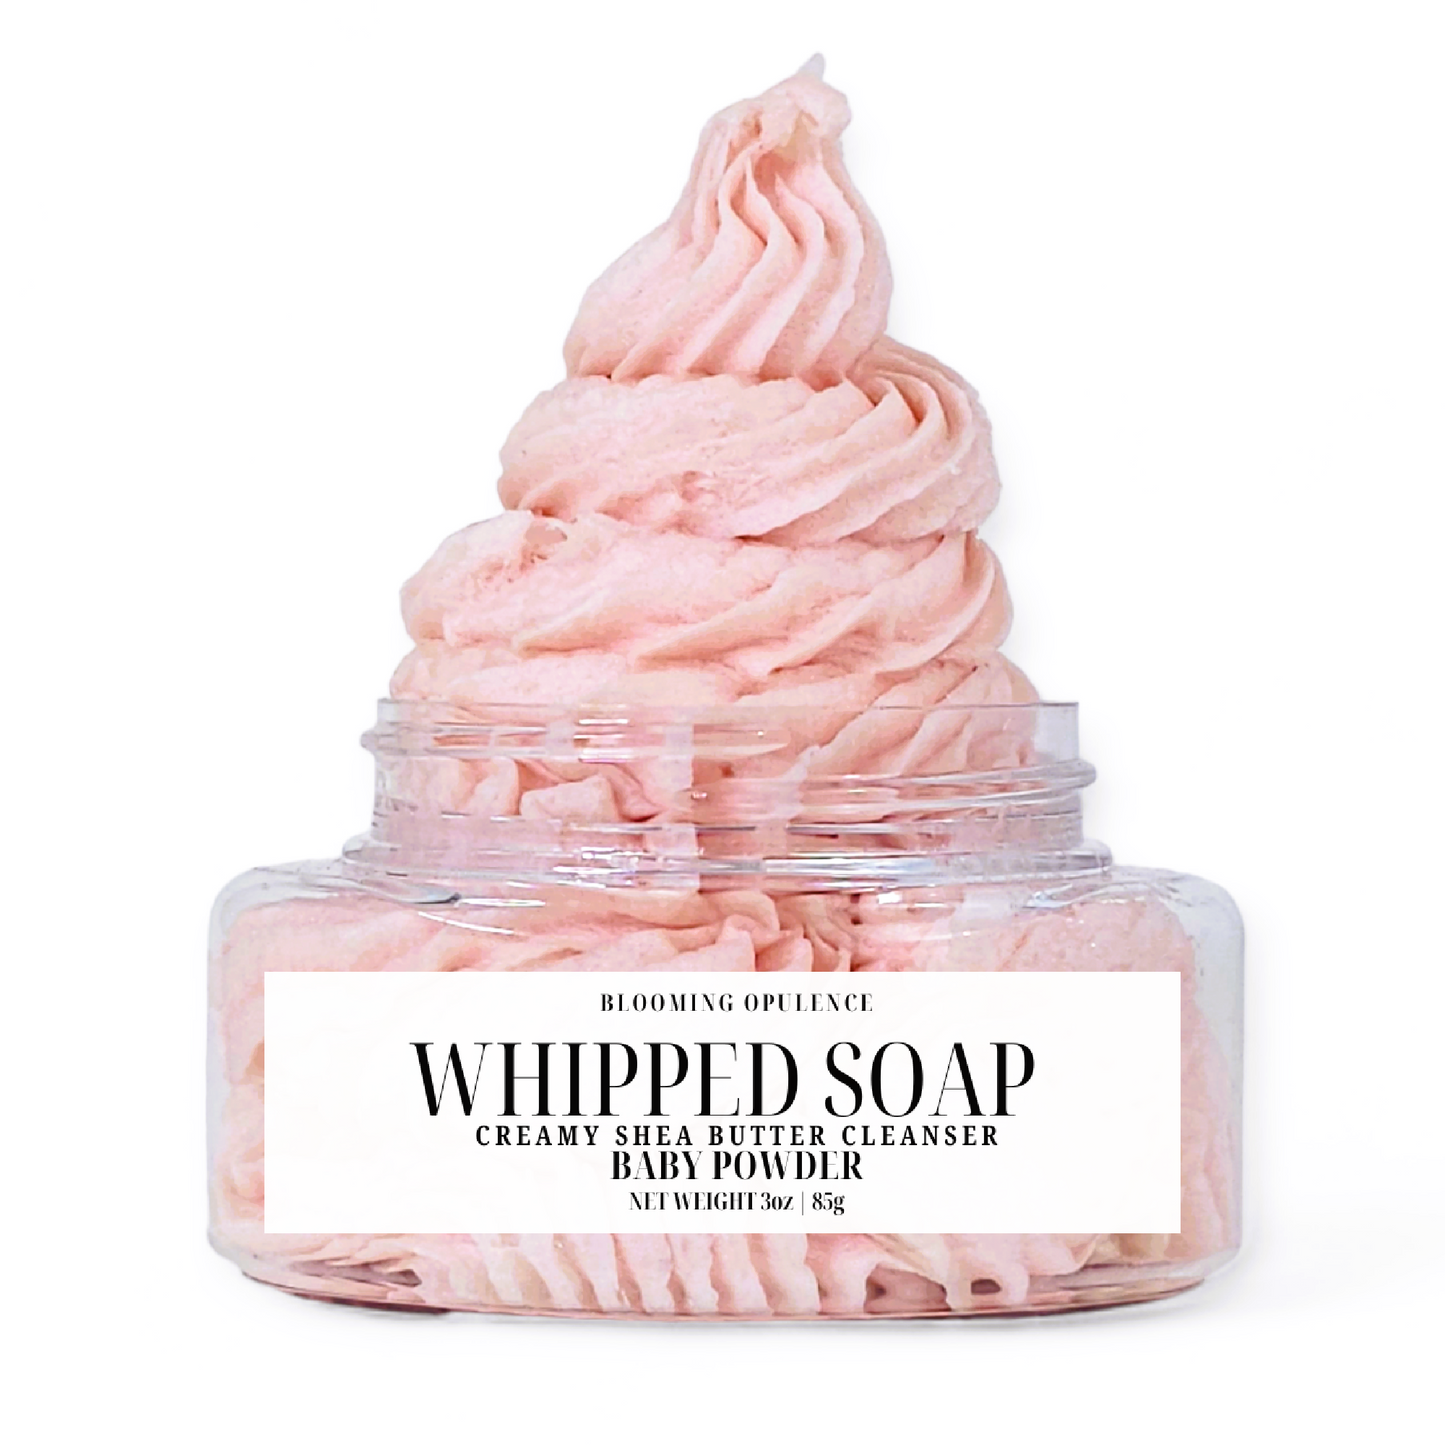 WHIPPED SOAP | PLANT BASED | BABY POWDER SCENTED SOAP